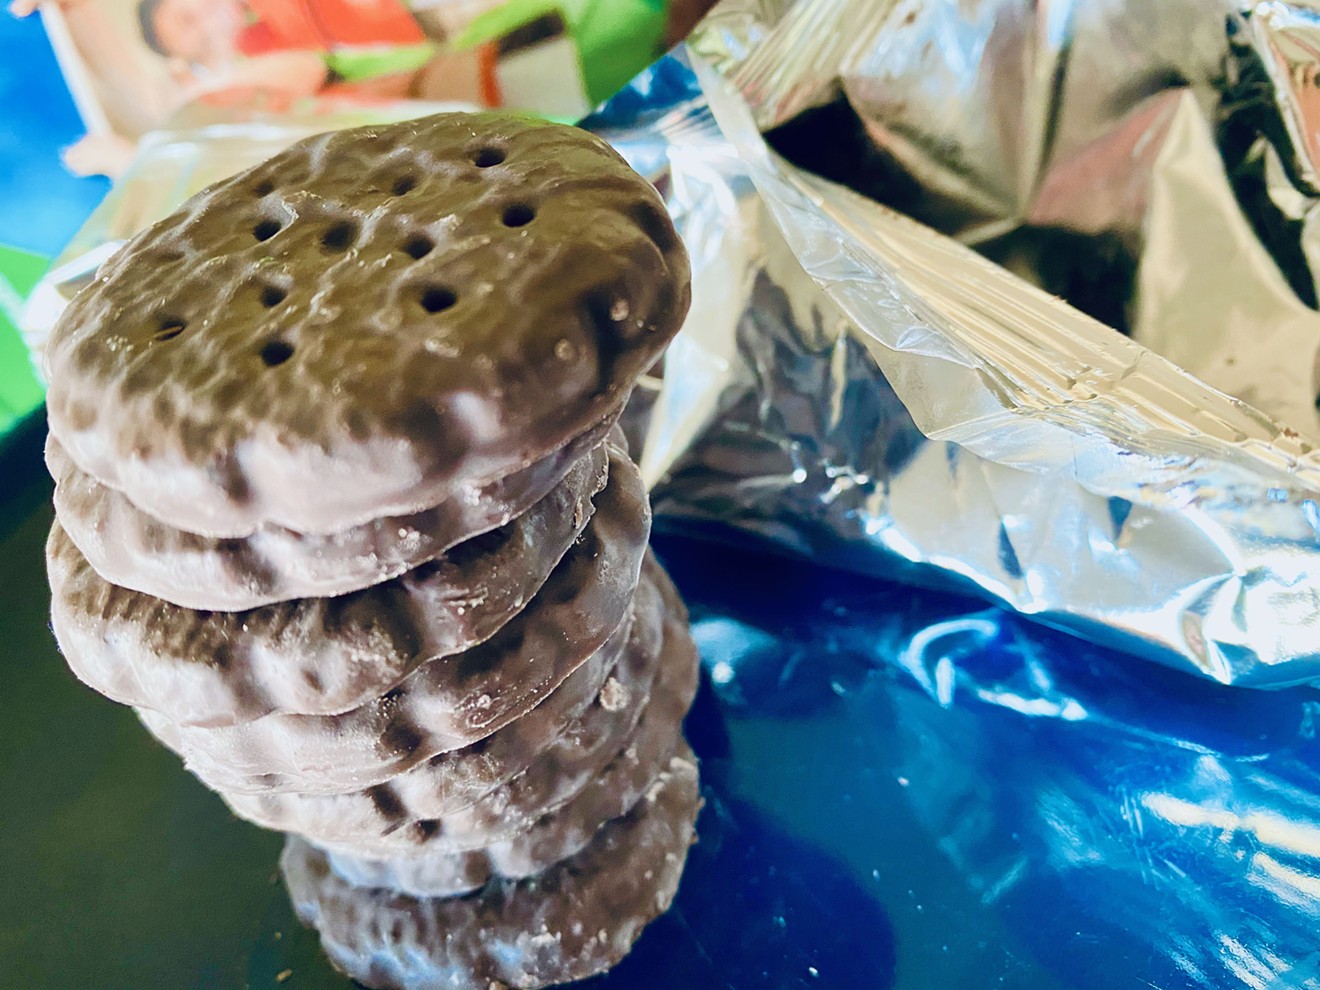 If you haven't inhaled a sleeve of Thin Mints this year, what's the hold-up?